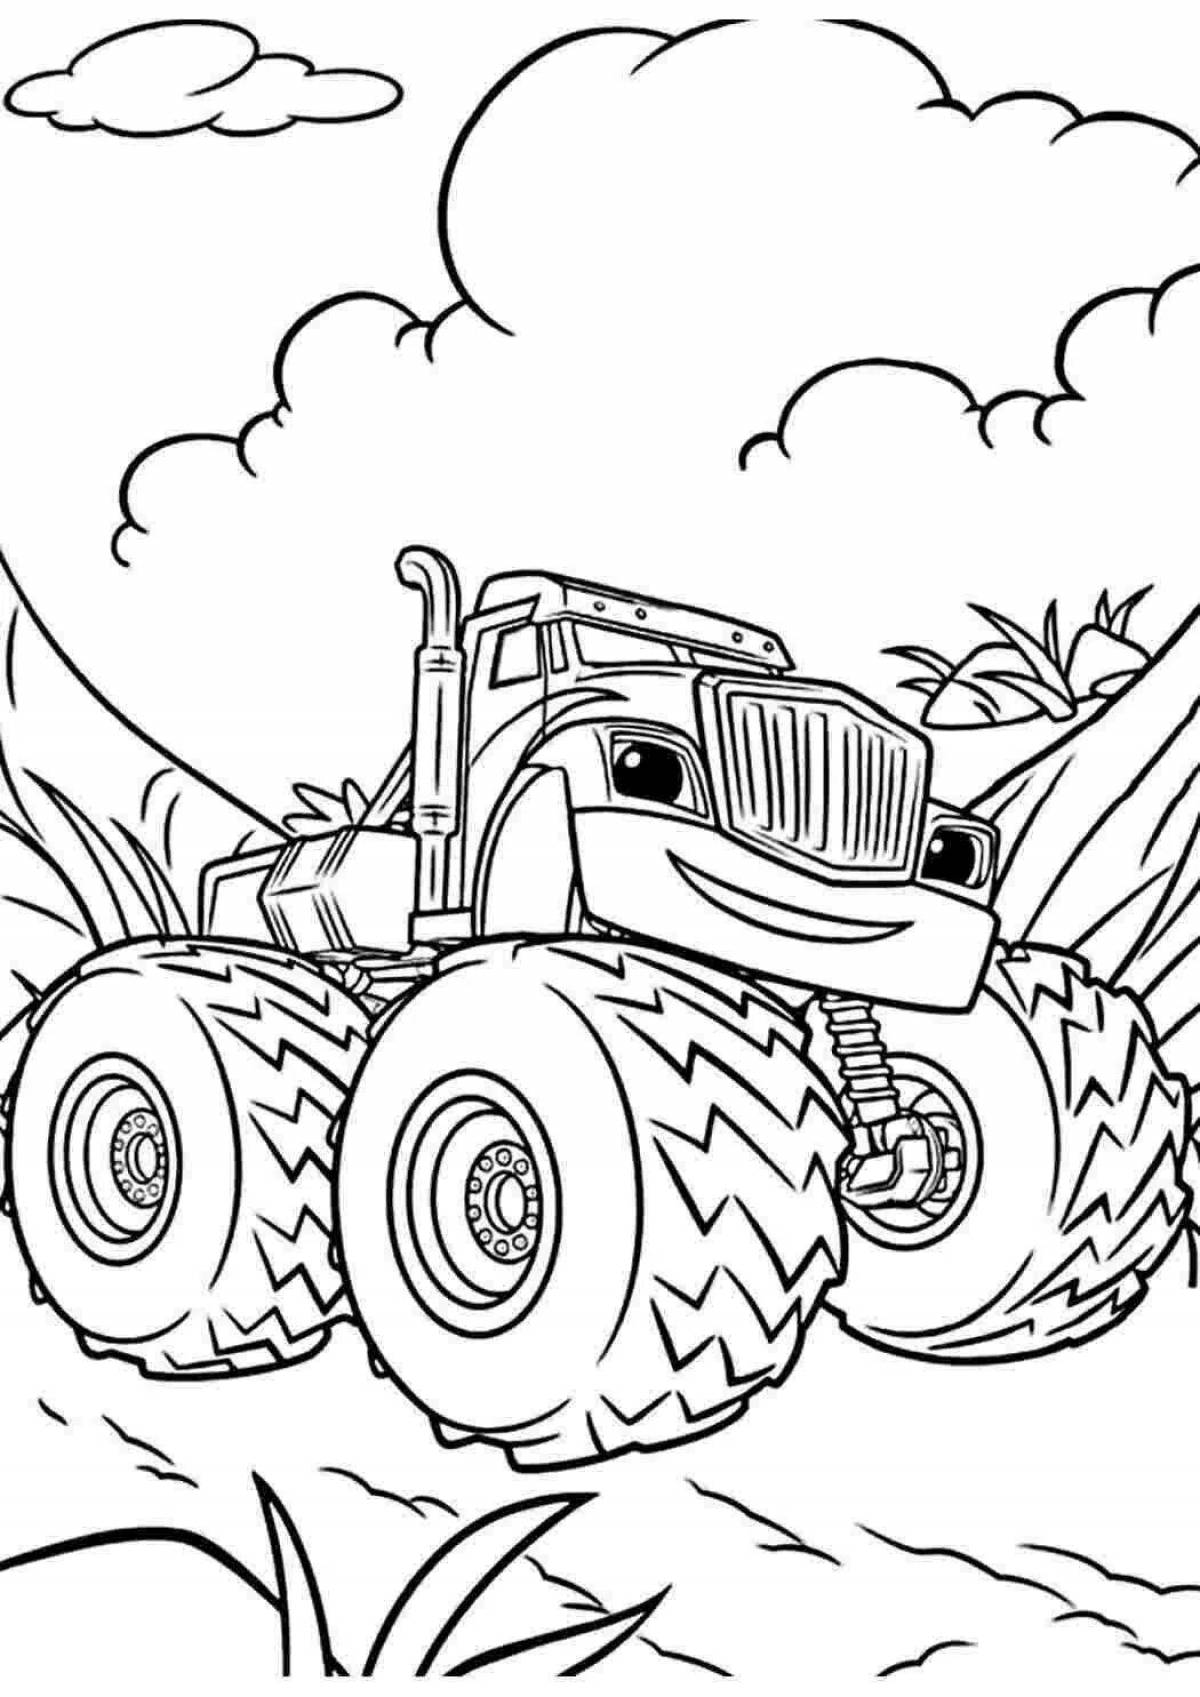 Splendorous flash and wonder cars coloring book for kids